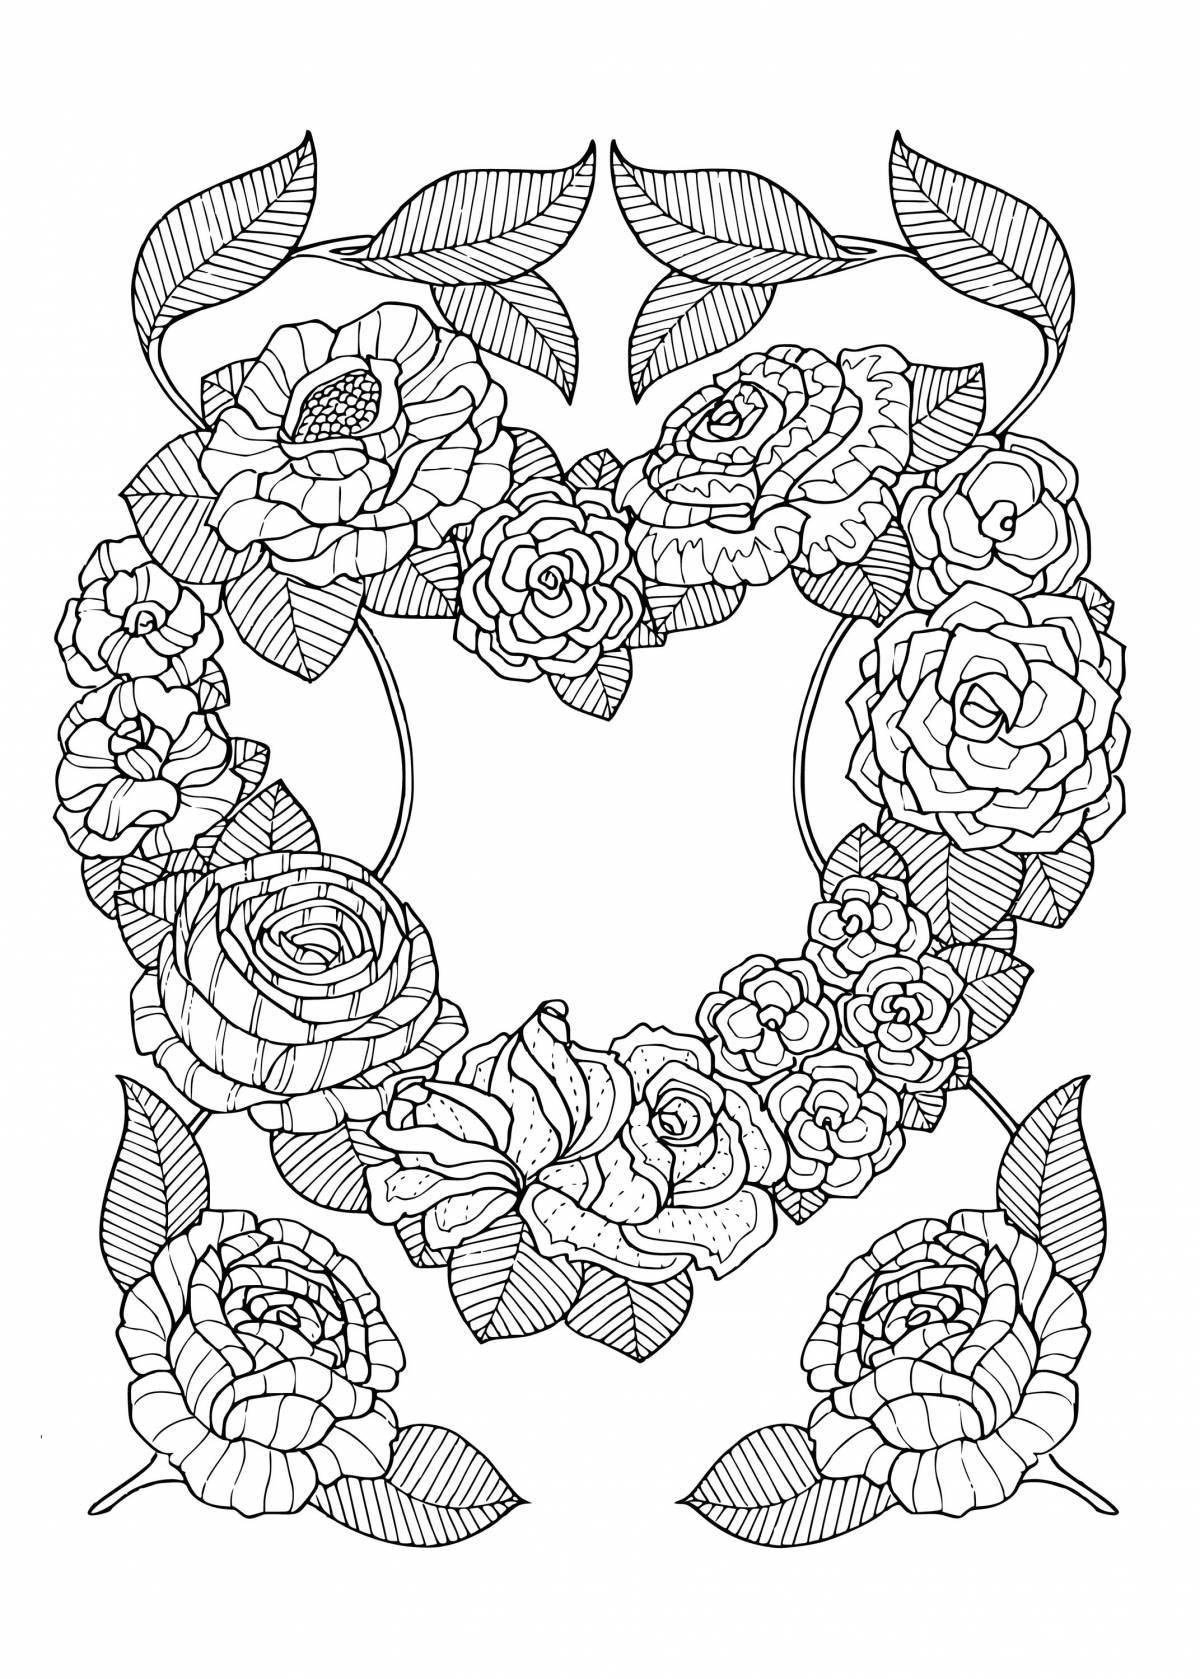 Amazing intricate flower coloring book